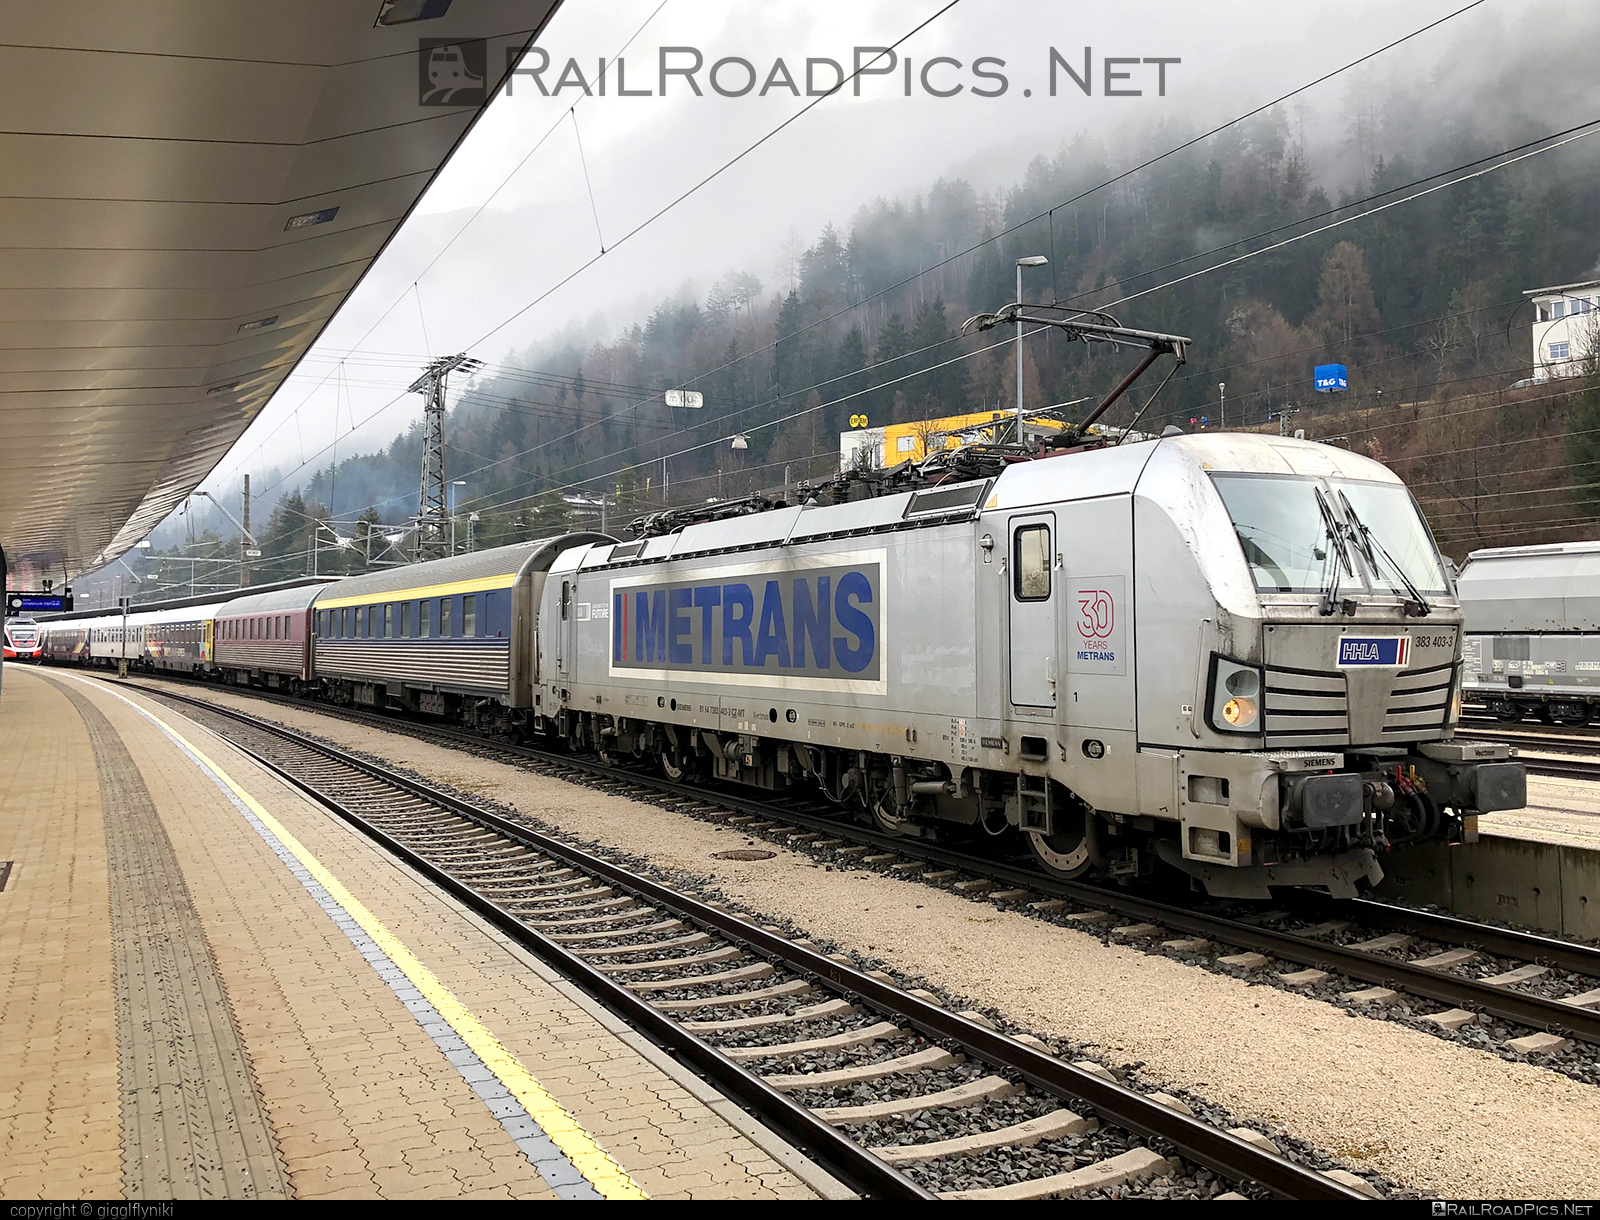 Siemens Vectron MS - 383 403-3 operated by METRANS, a.s. #hhla #metrans #siemens #siemensVectron #siemensVectronMS #urlaubsexpress #vectron #vectronMS